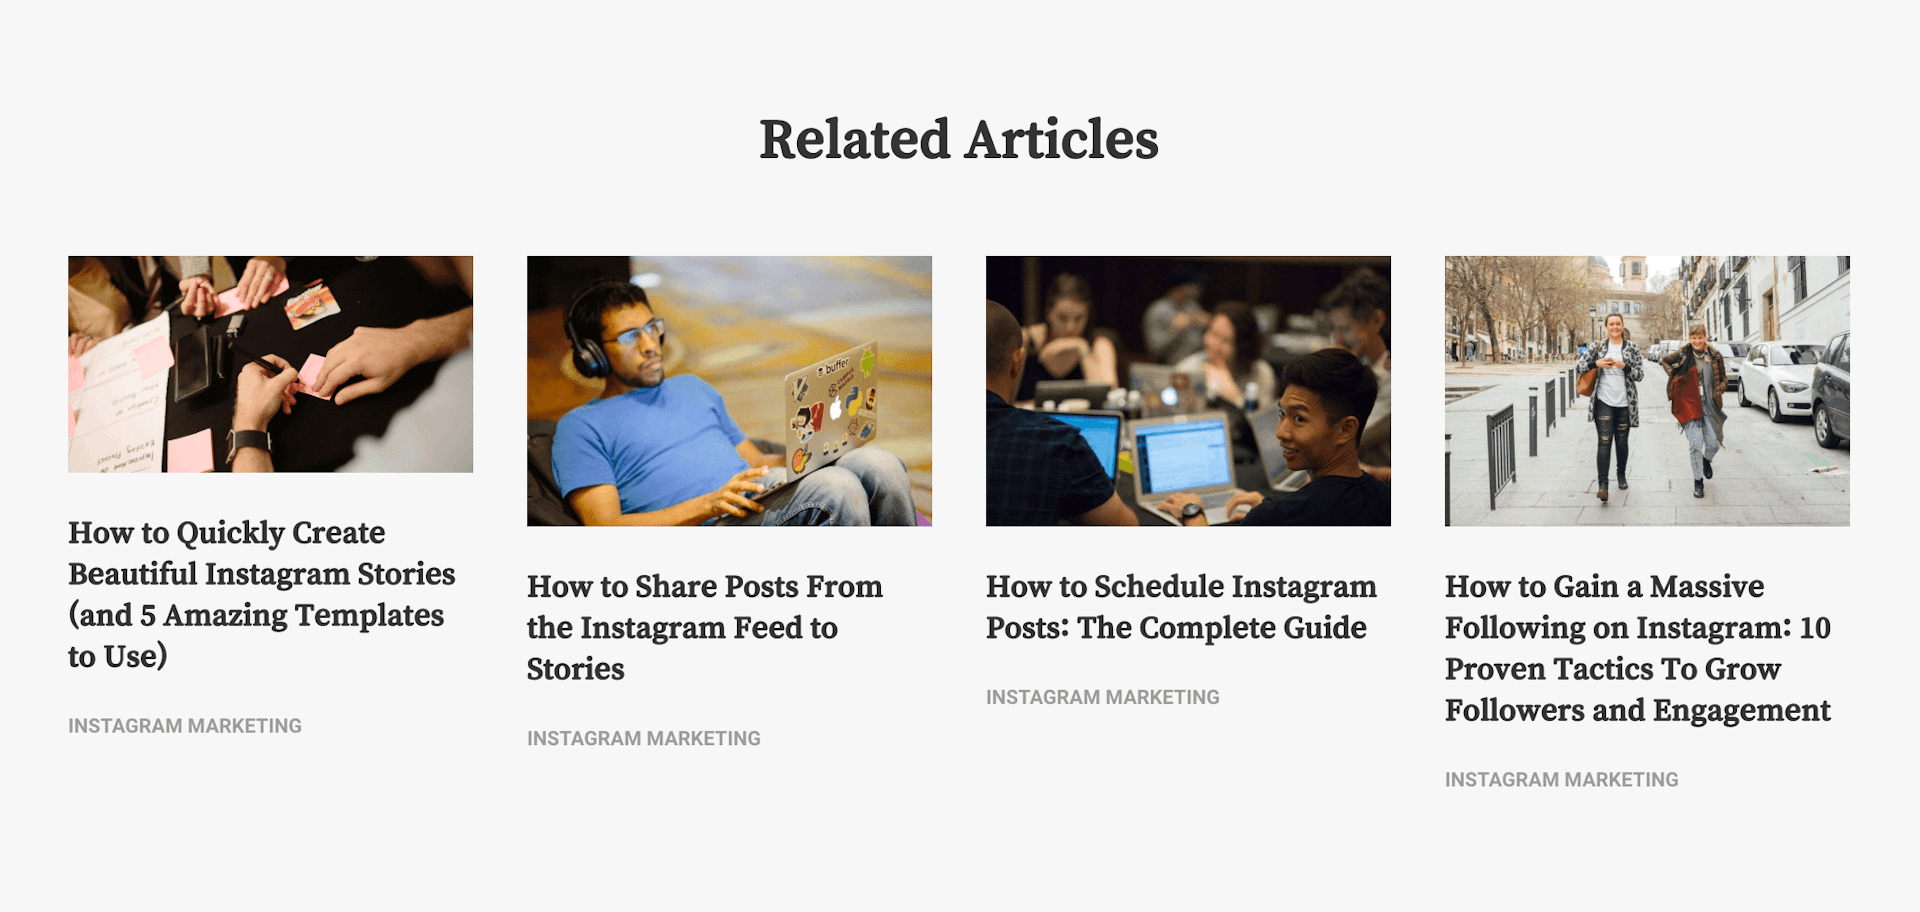 Related articles